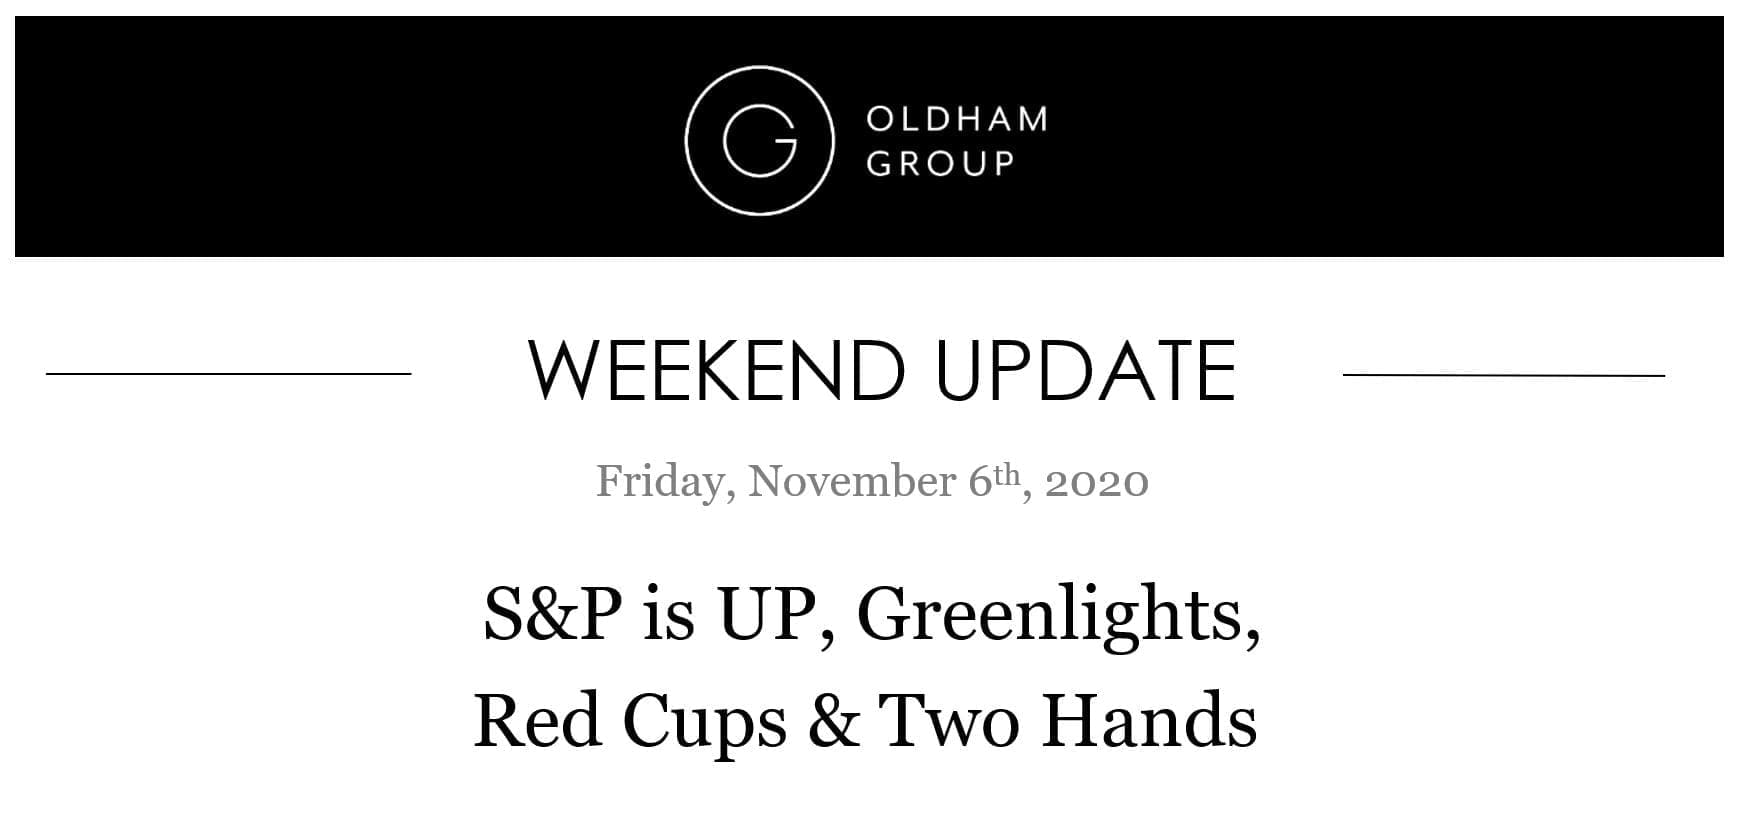 The Oldham Group | Updates November 9, 2020